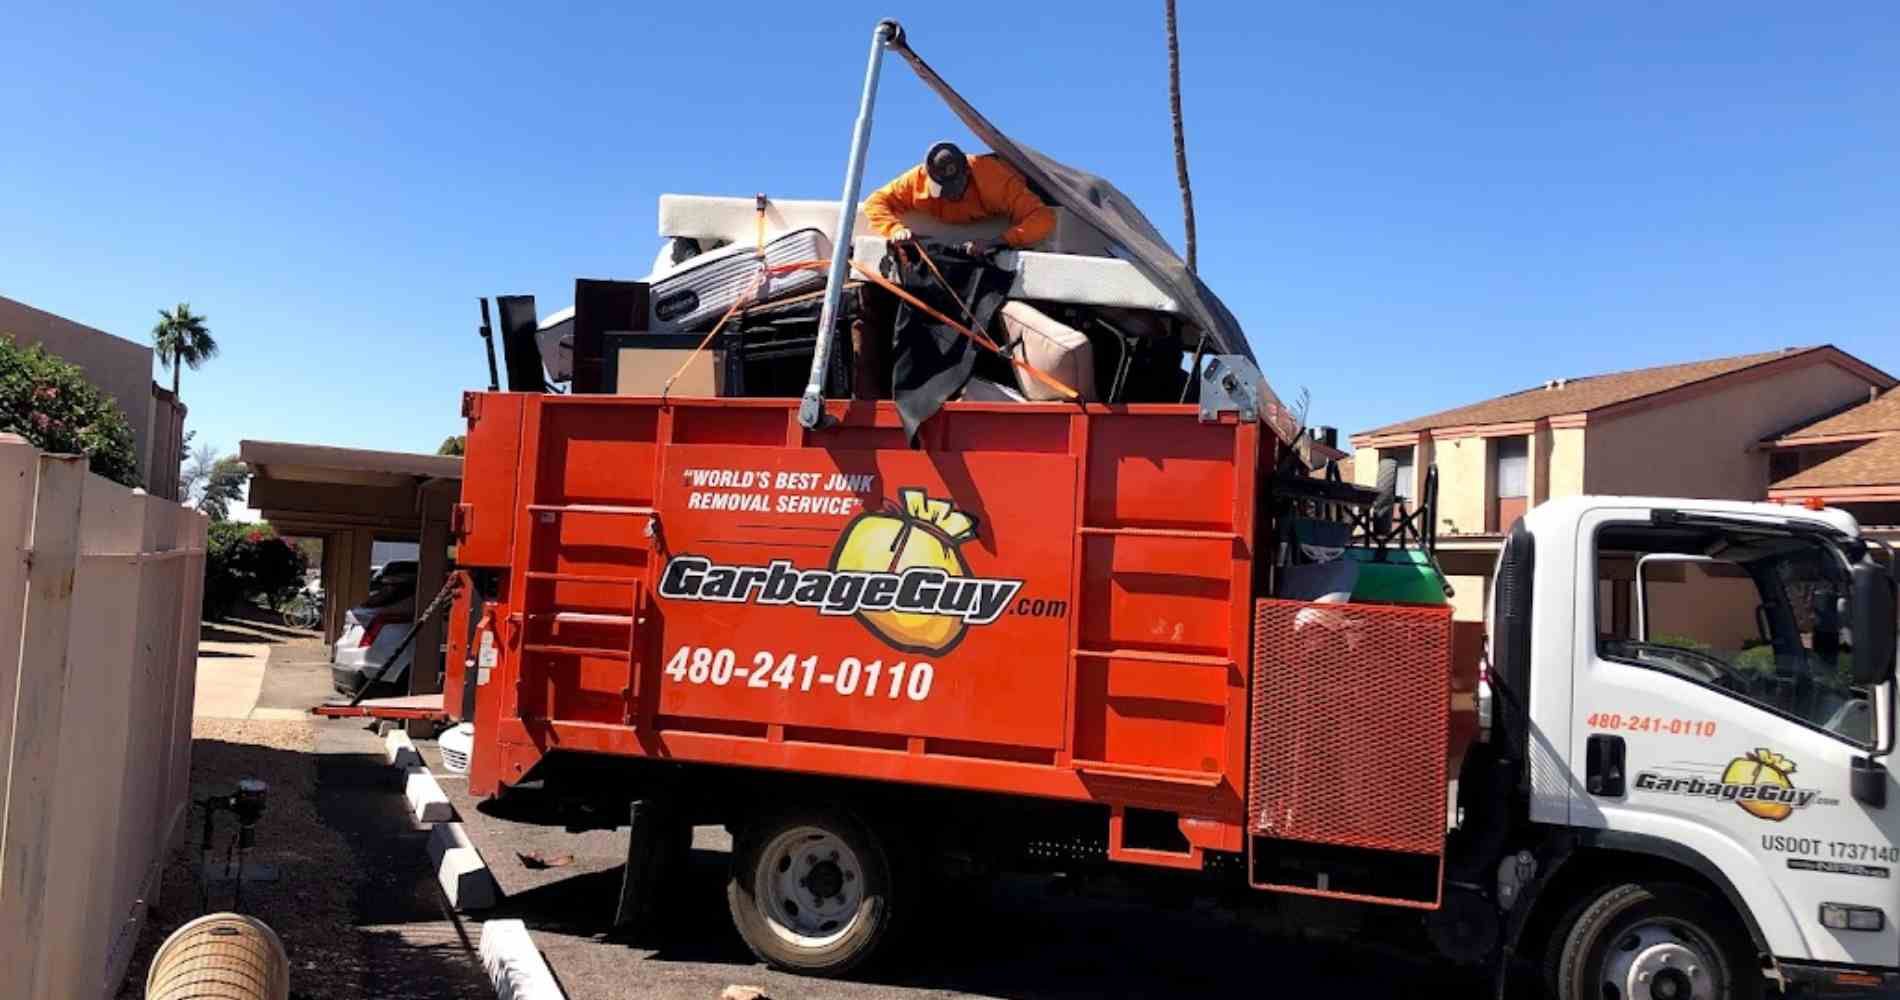 #1 for Furniture Removal in Tempe, AZ With Over 1200 5-Star Reviews!